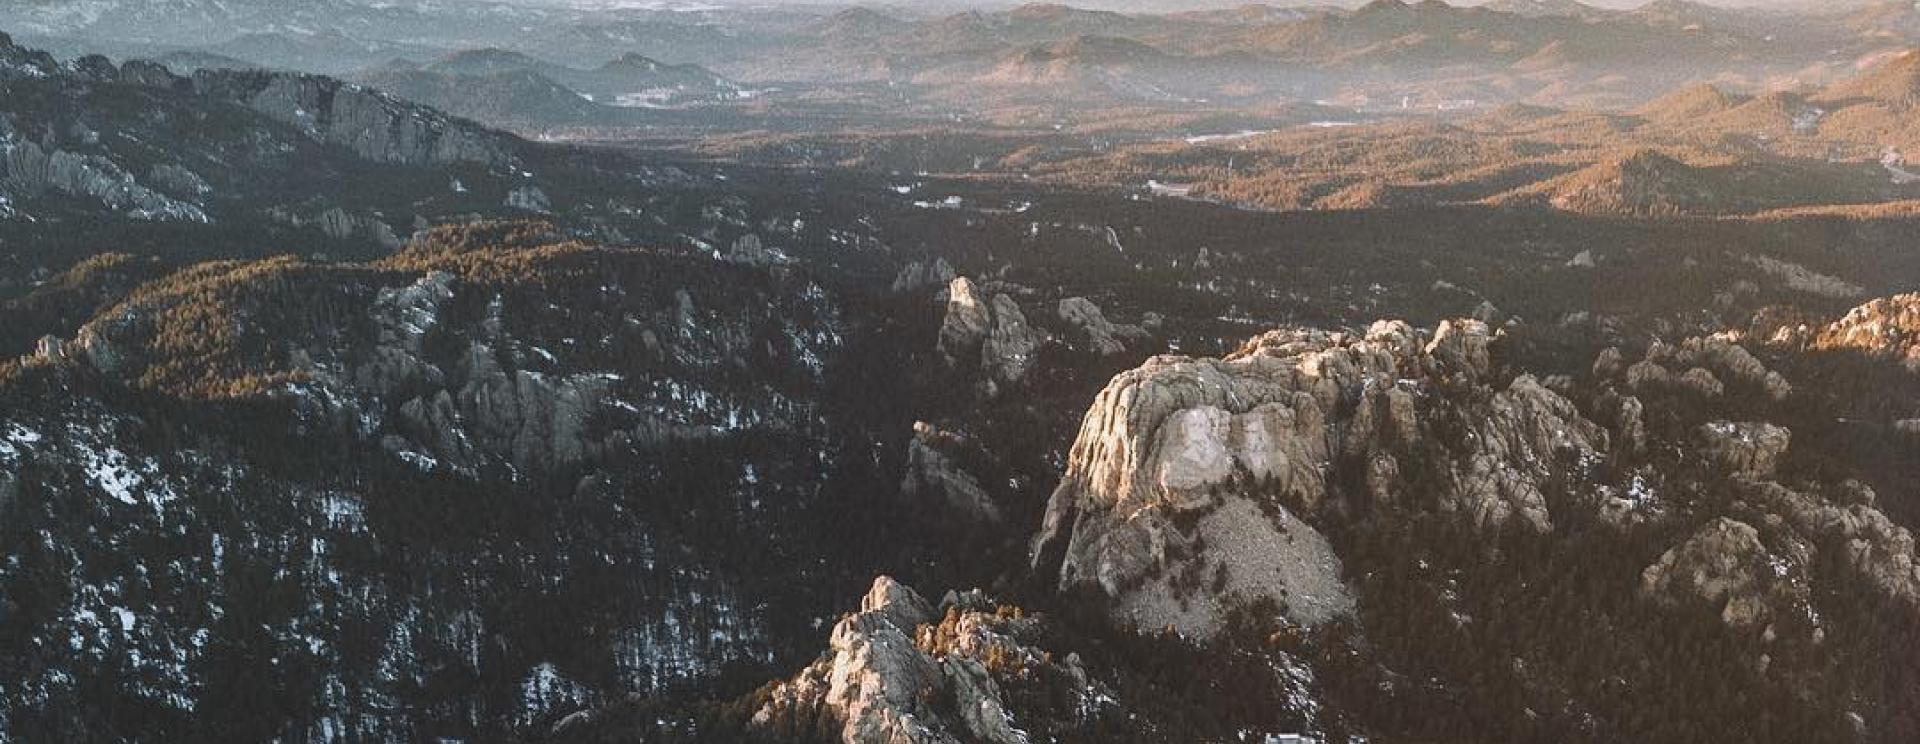 The 5 Most Remarkable Photos of the Black Hills in January 2019